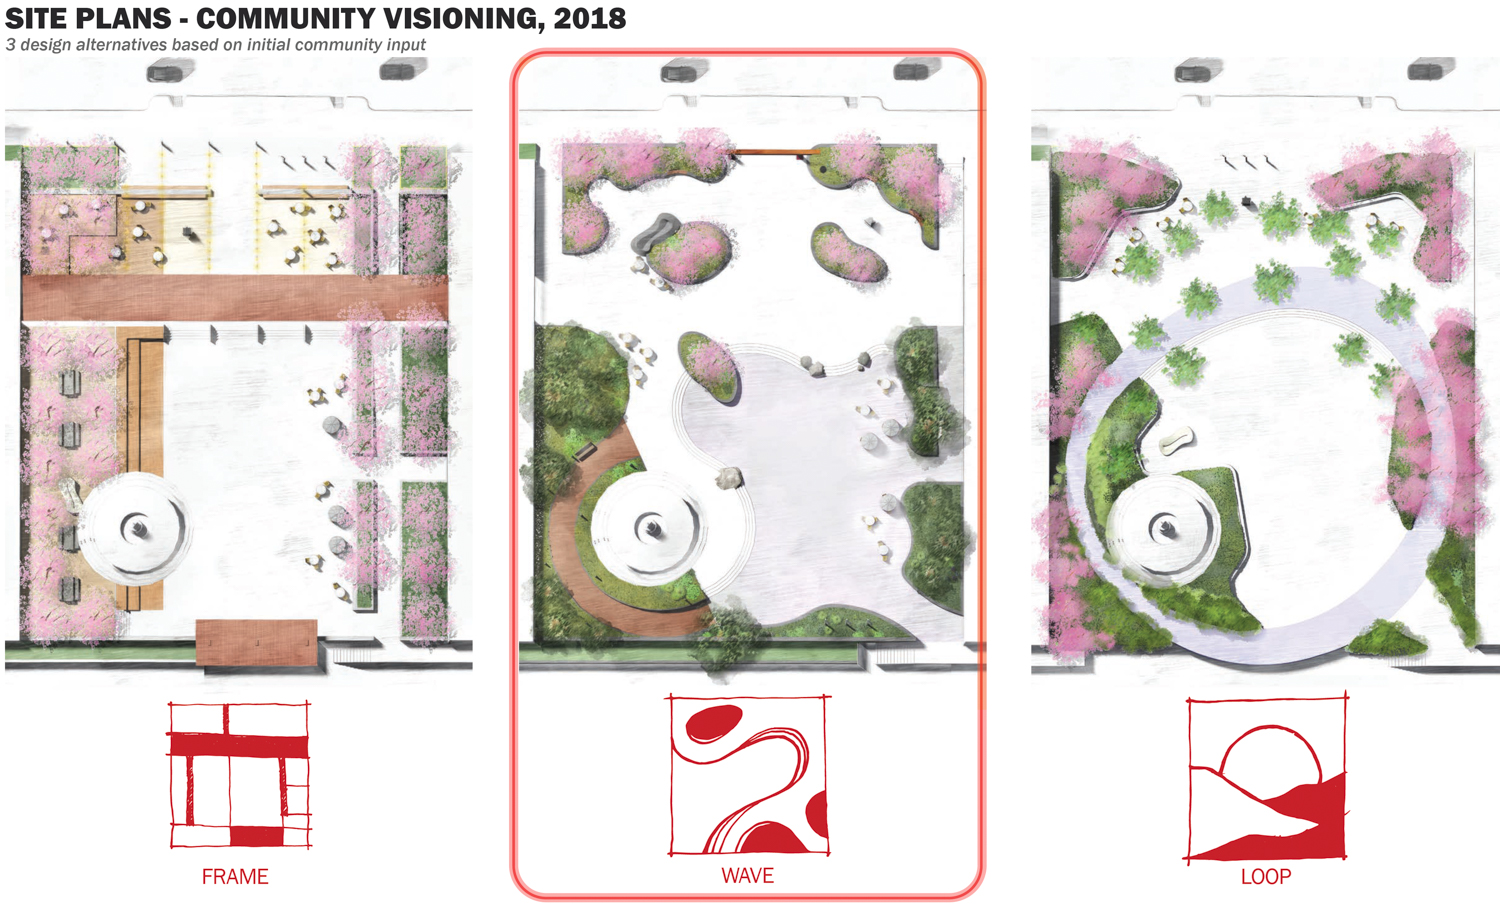 Japantown Peace Plaza community vision site plans circa 2018, rendering by RHAA Landscape Architects